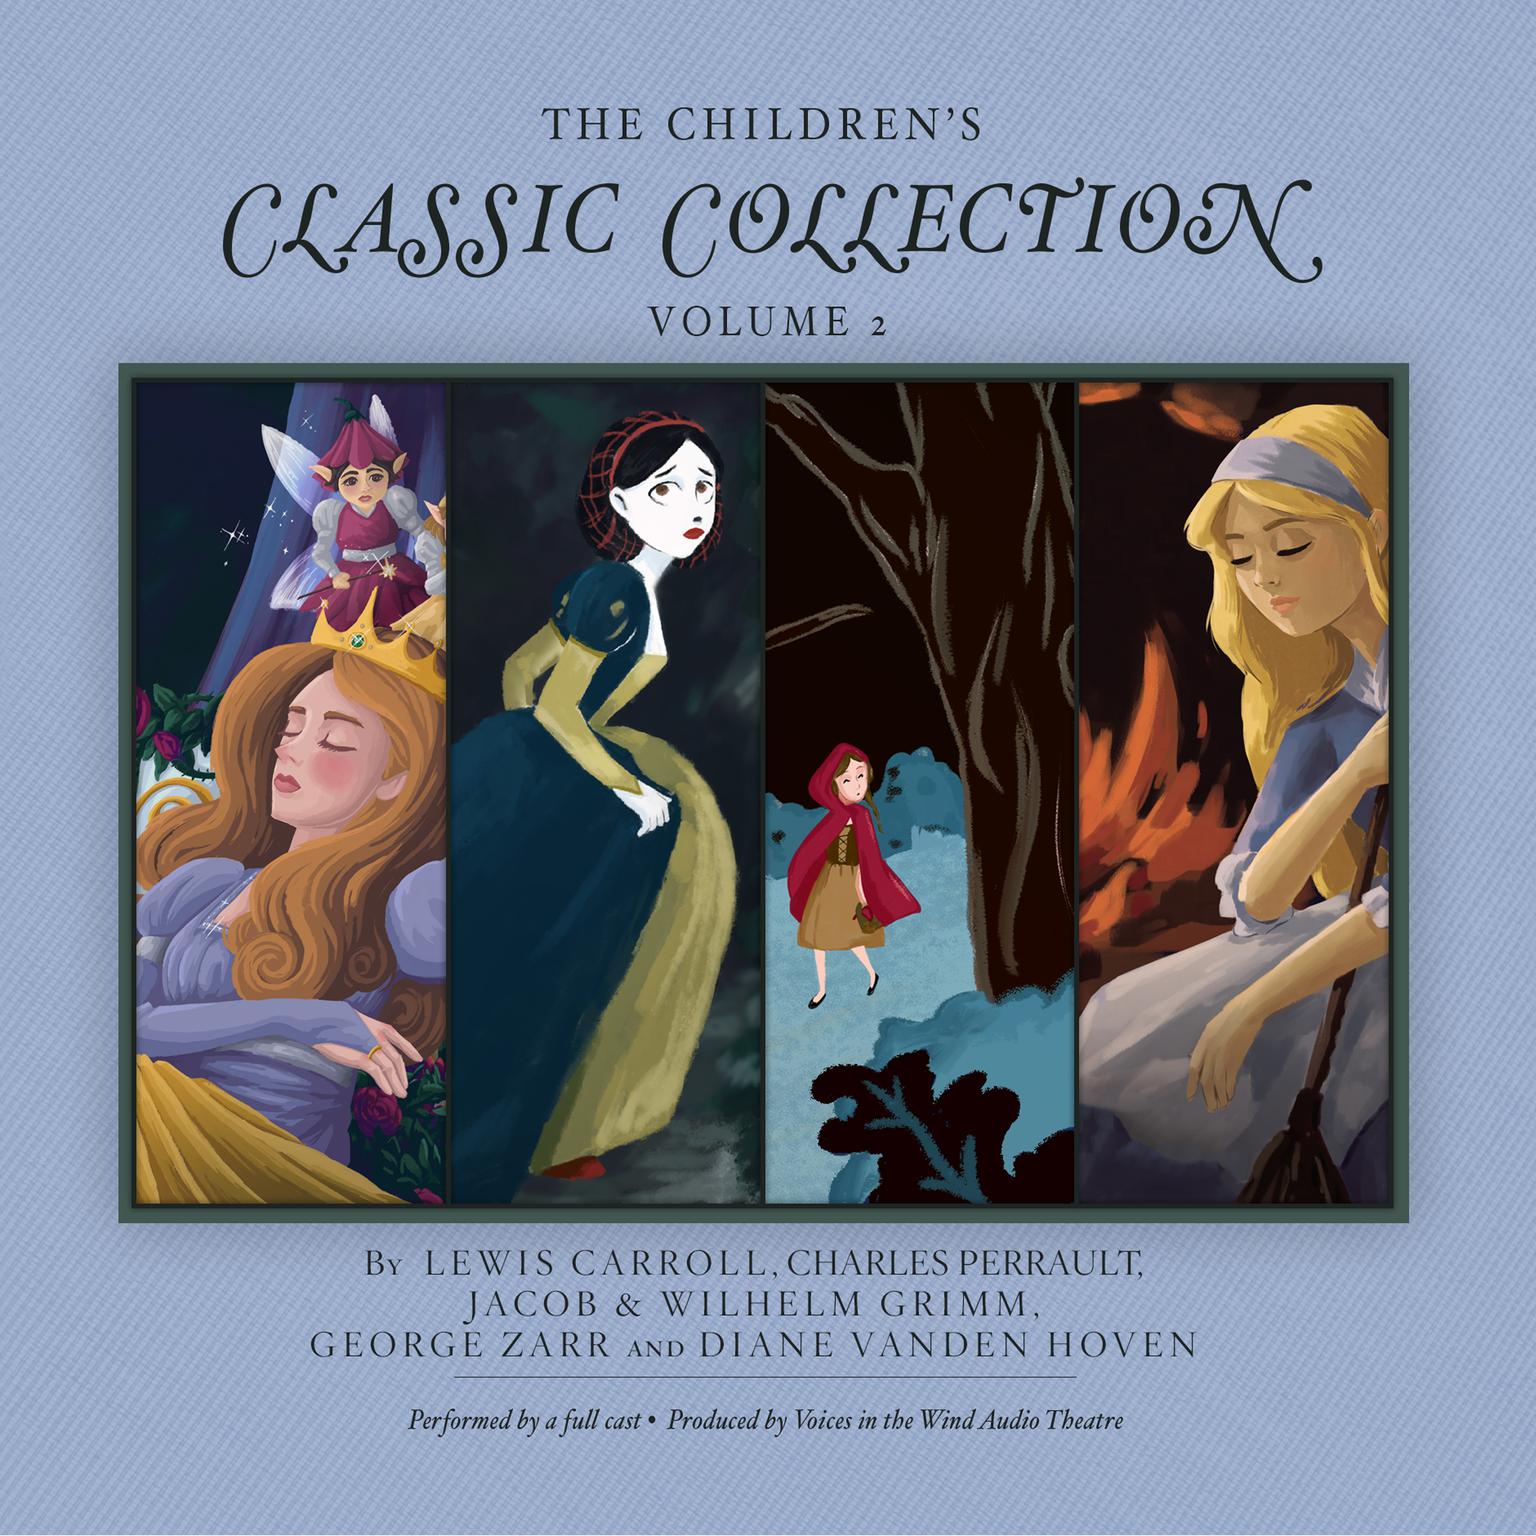 The Childrens Classic Collection, Vol. 2 Audiobook, by Lewis Carroll